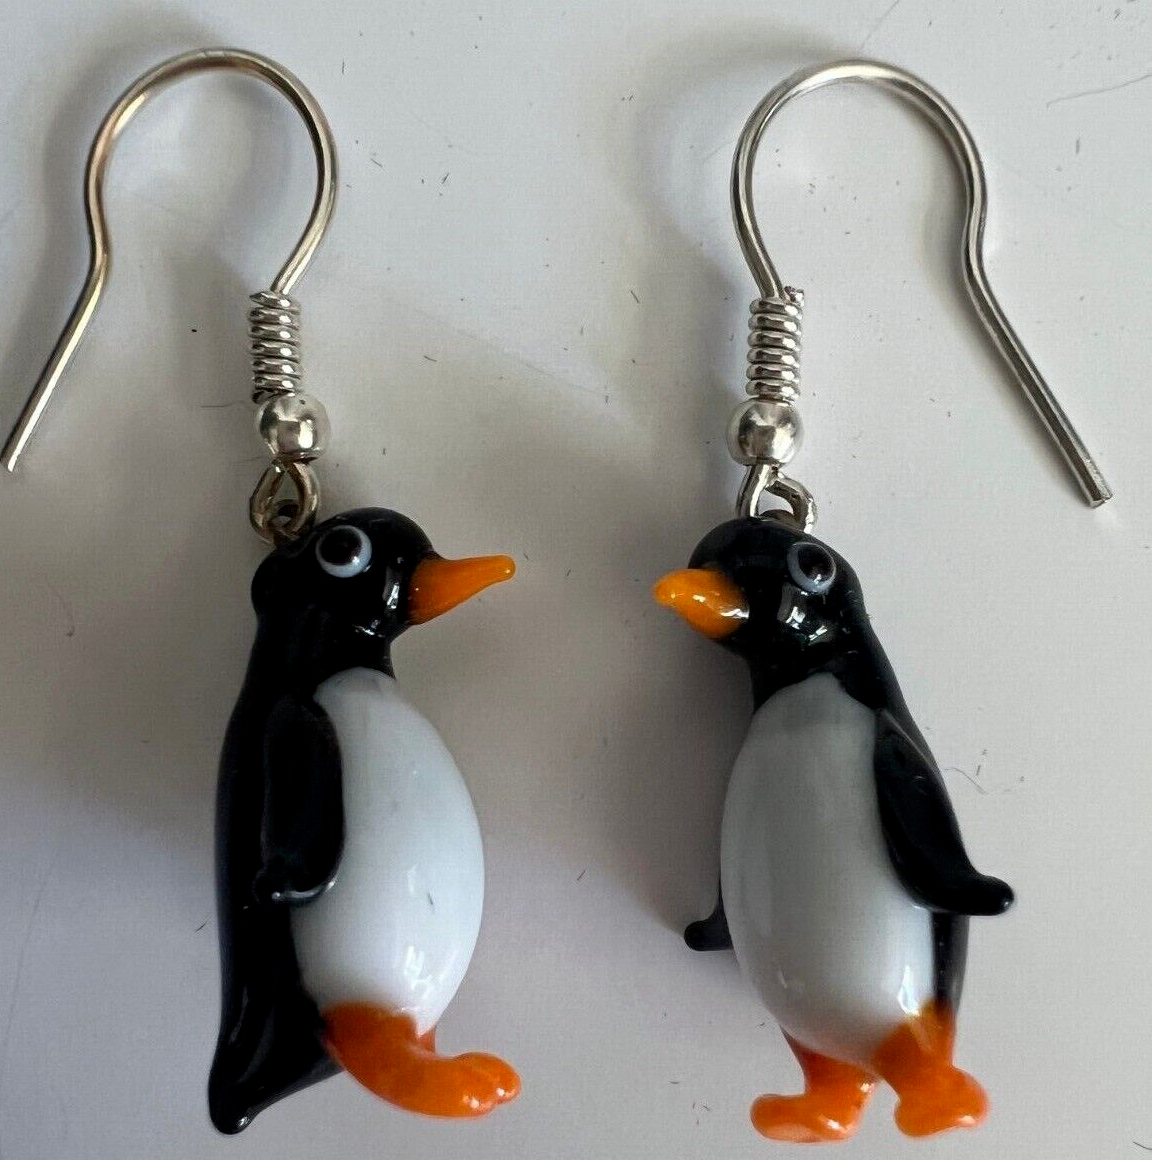 New Collection!! Murano Glass Handmade Penguin & 925 Sterling Silver Earrings - $27.96